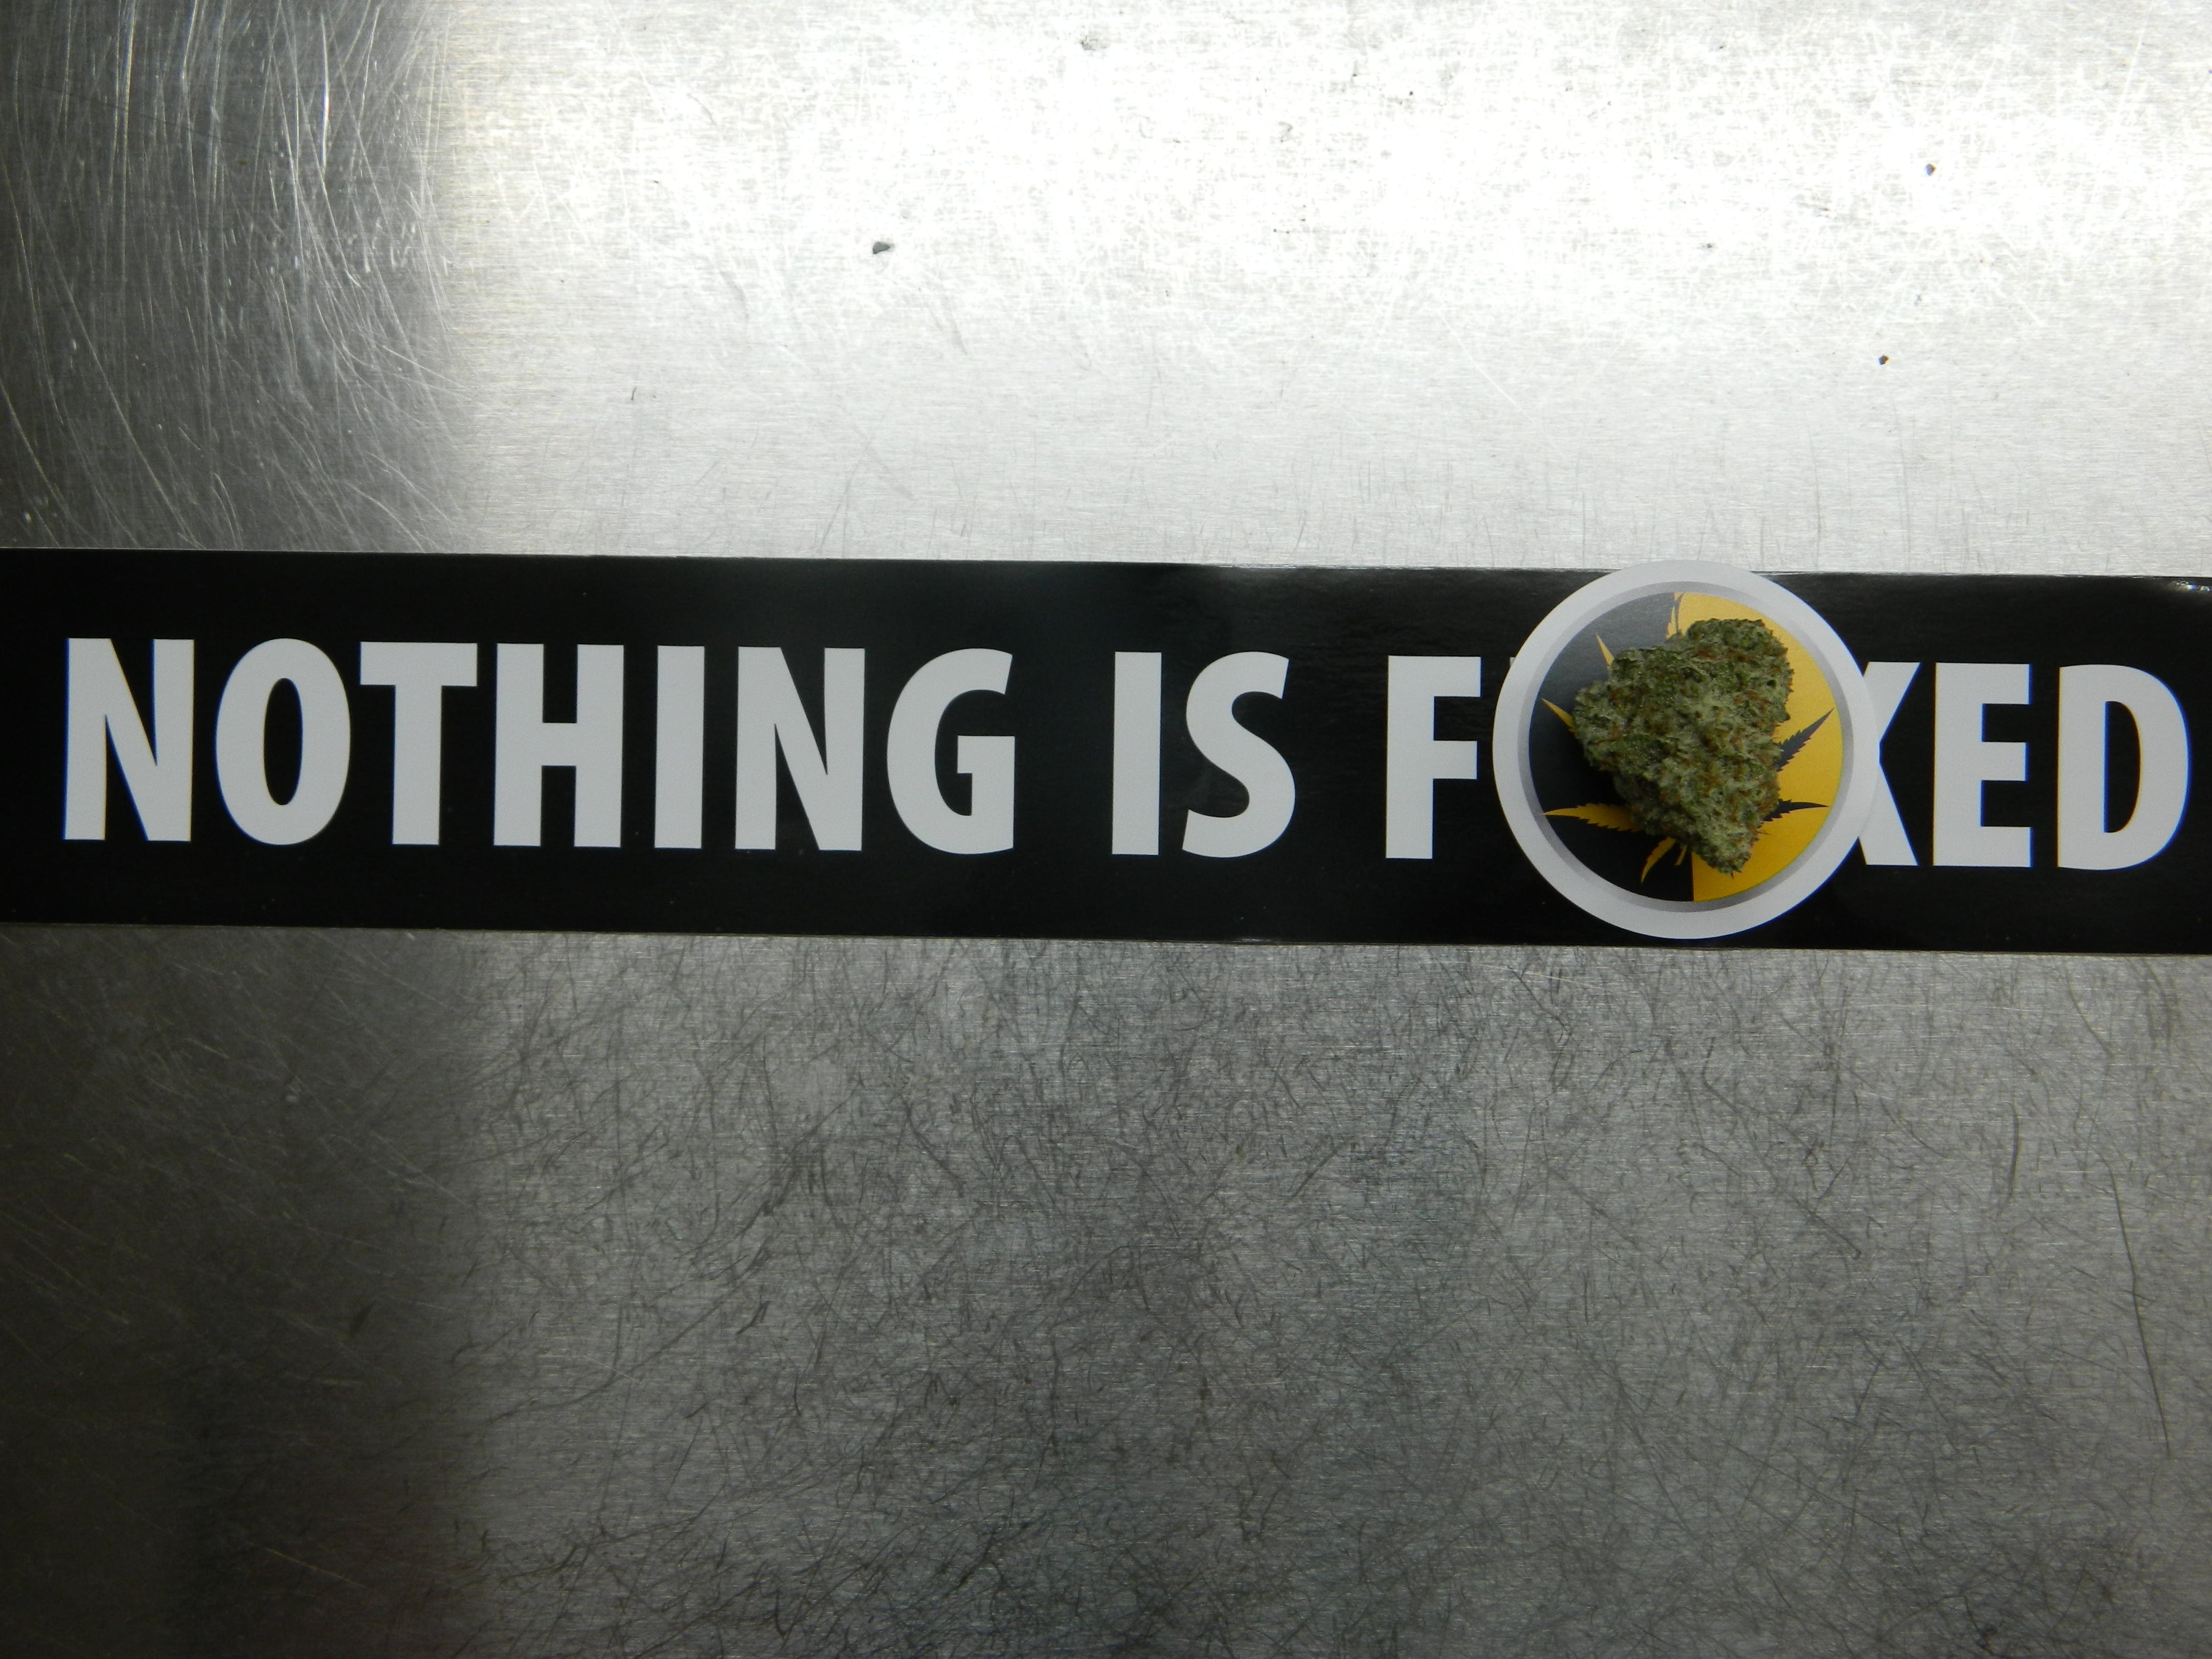 gear-sweet-relief-nothing-is-fked-sticker